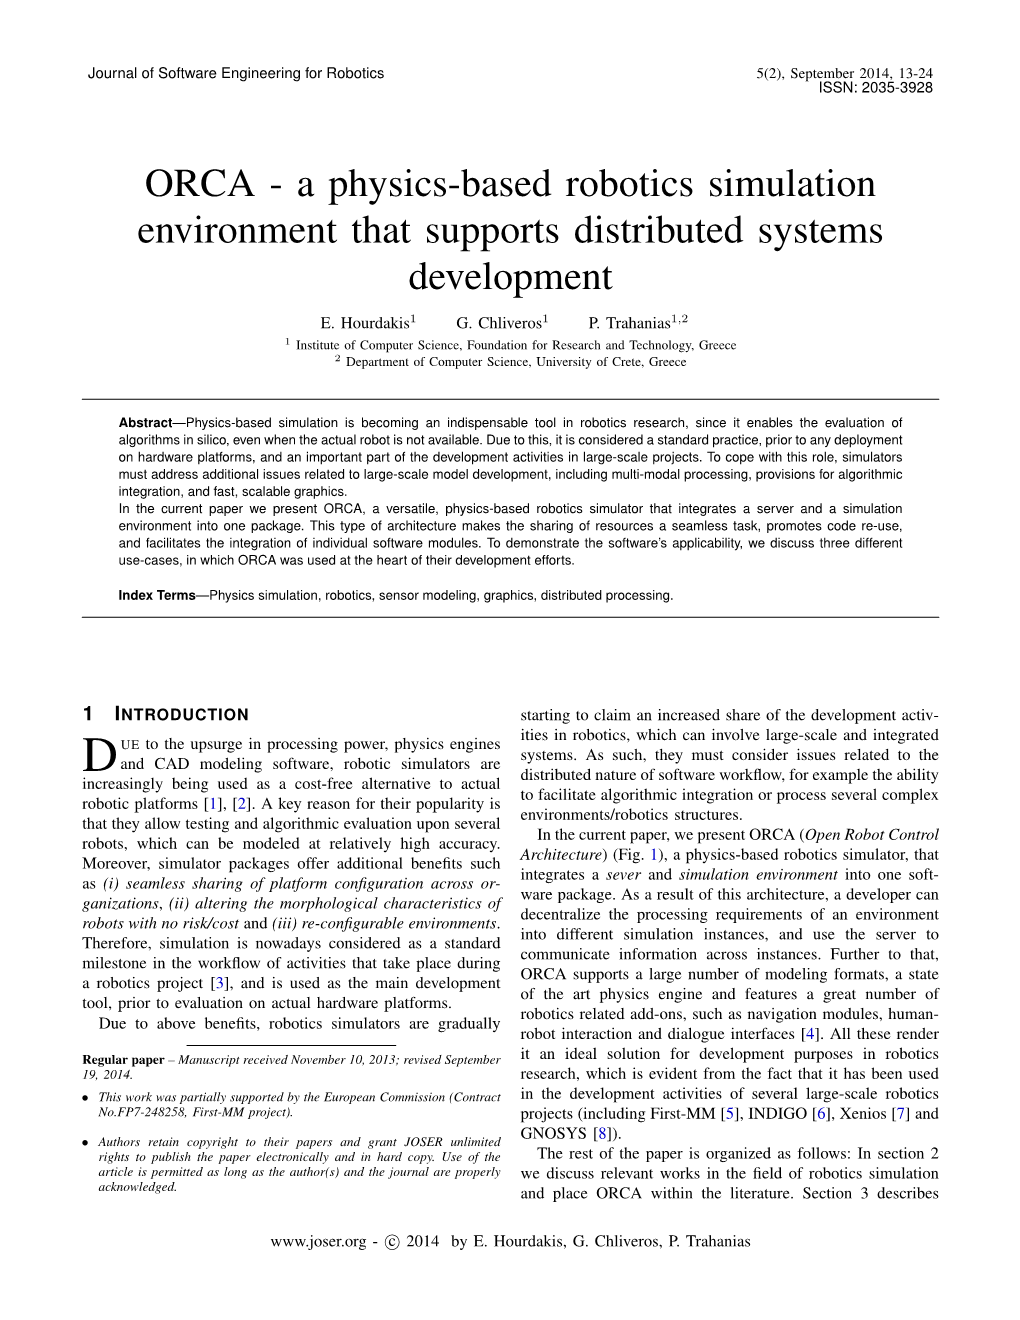 ORCA - a Physics-Based Robotics Simulation Environment That Supports Distributed Systems Development